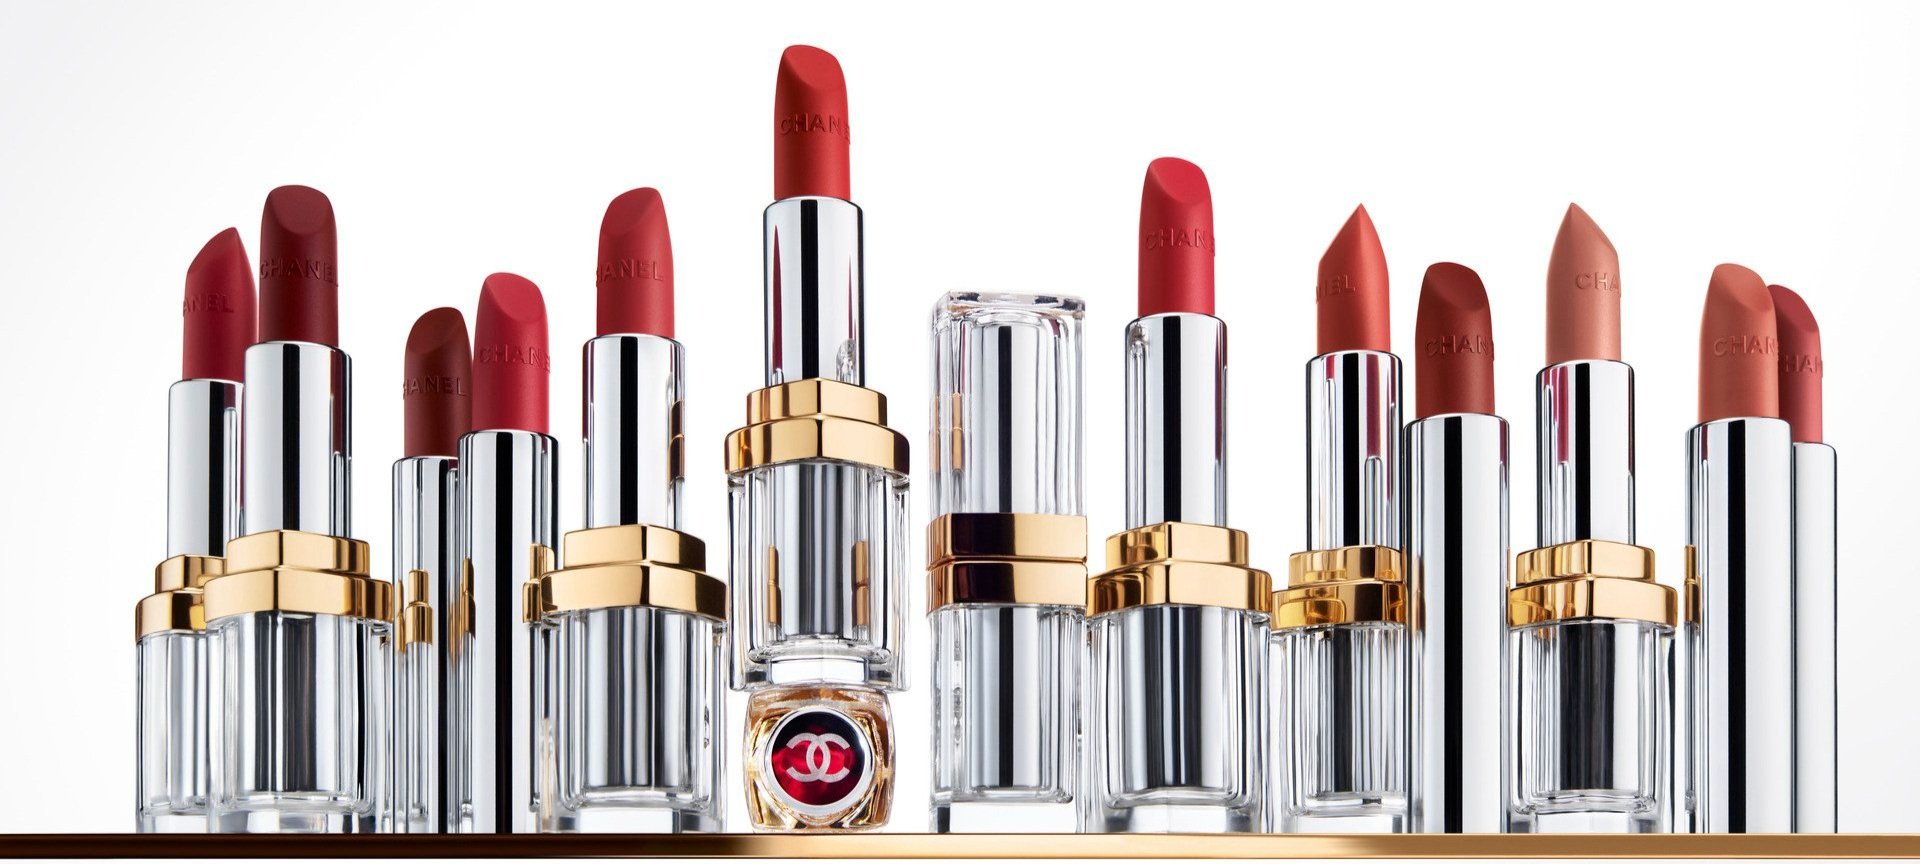 Chanel Taffeta Rose Rouge Coco Lipstick Review, Photos, Swatches